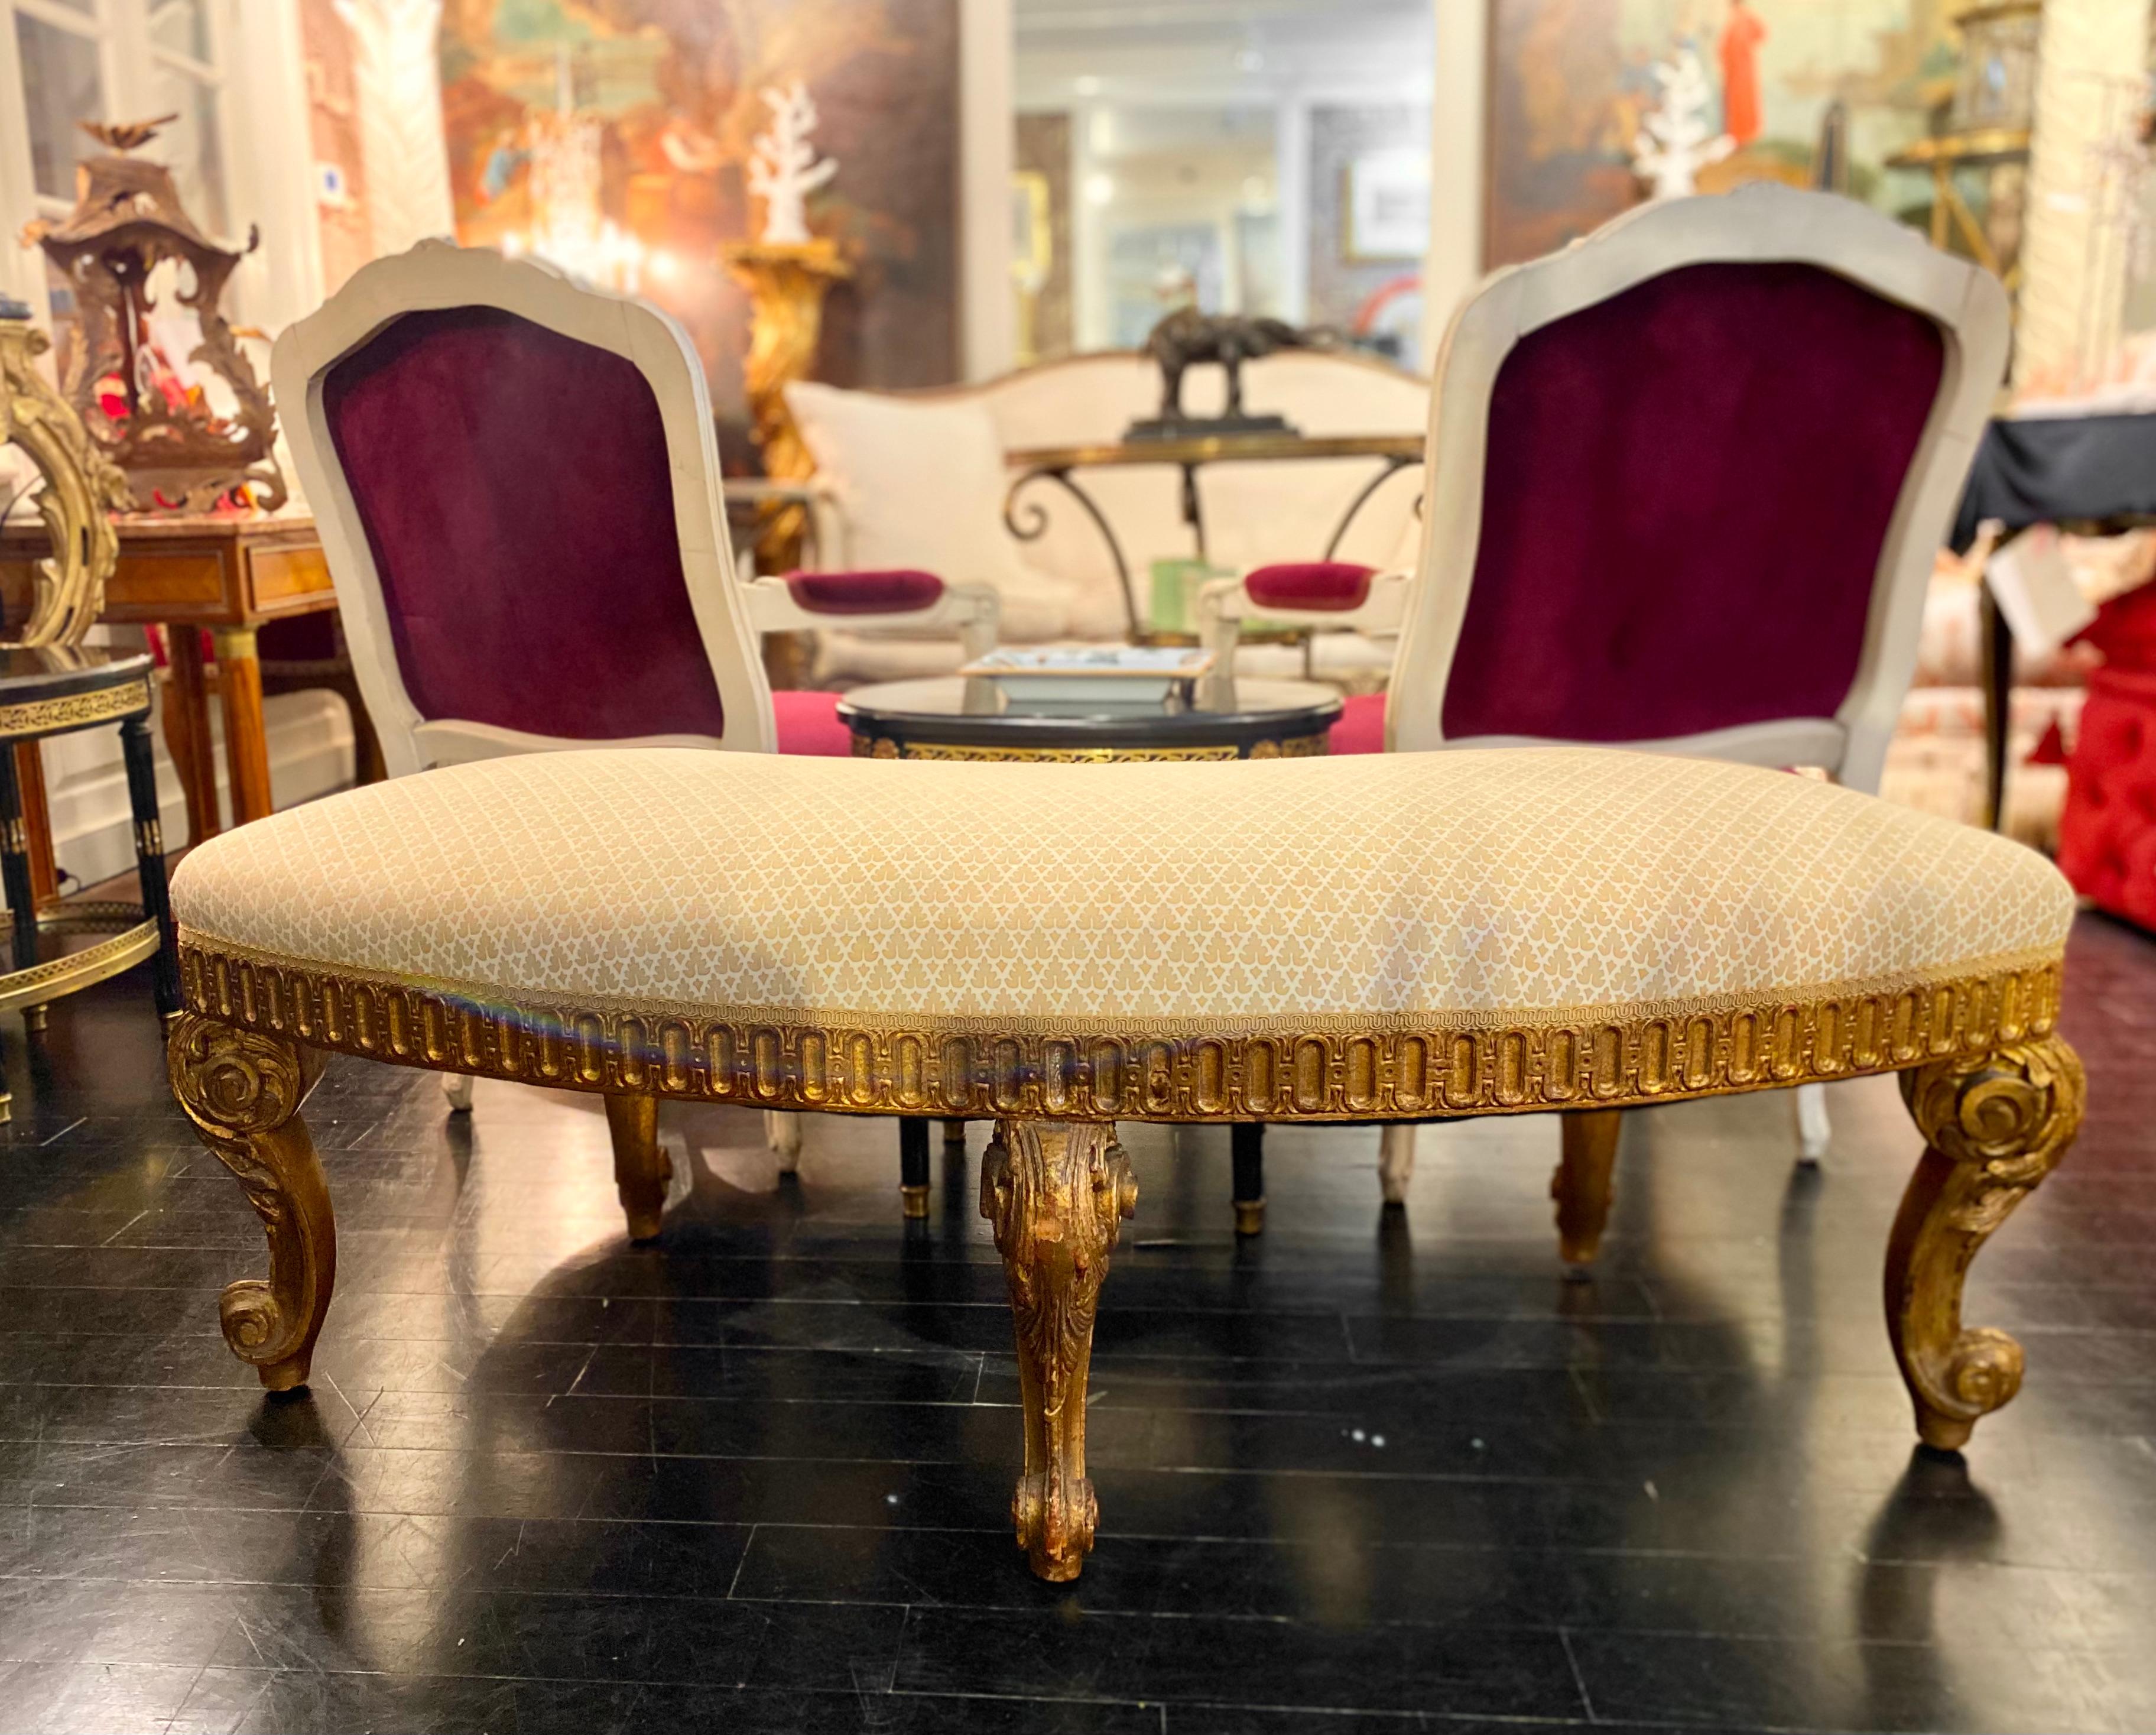 19th Century French Louis XVI Style Giltwood Semi-Circular Bench, Jacob-Inspired Model For Sale